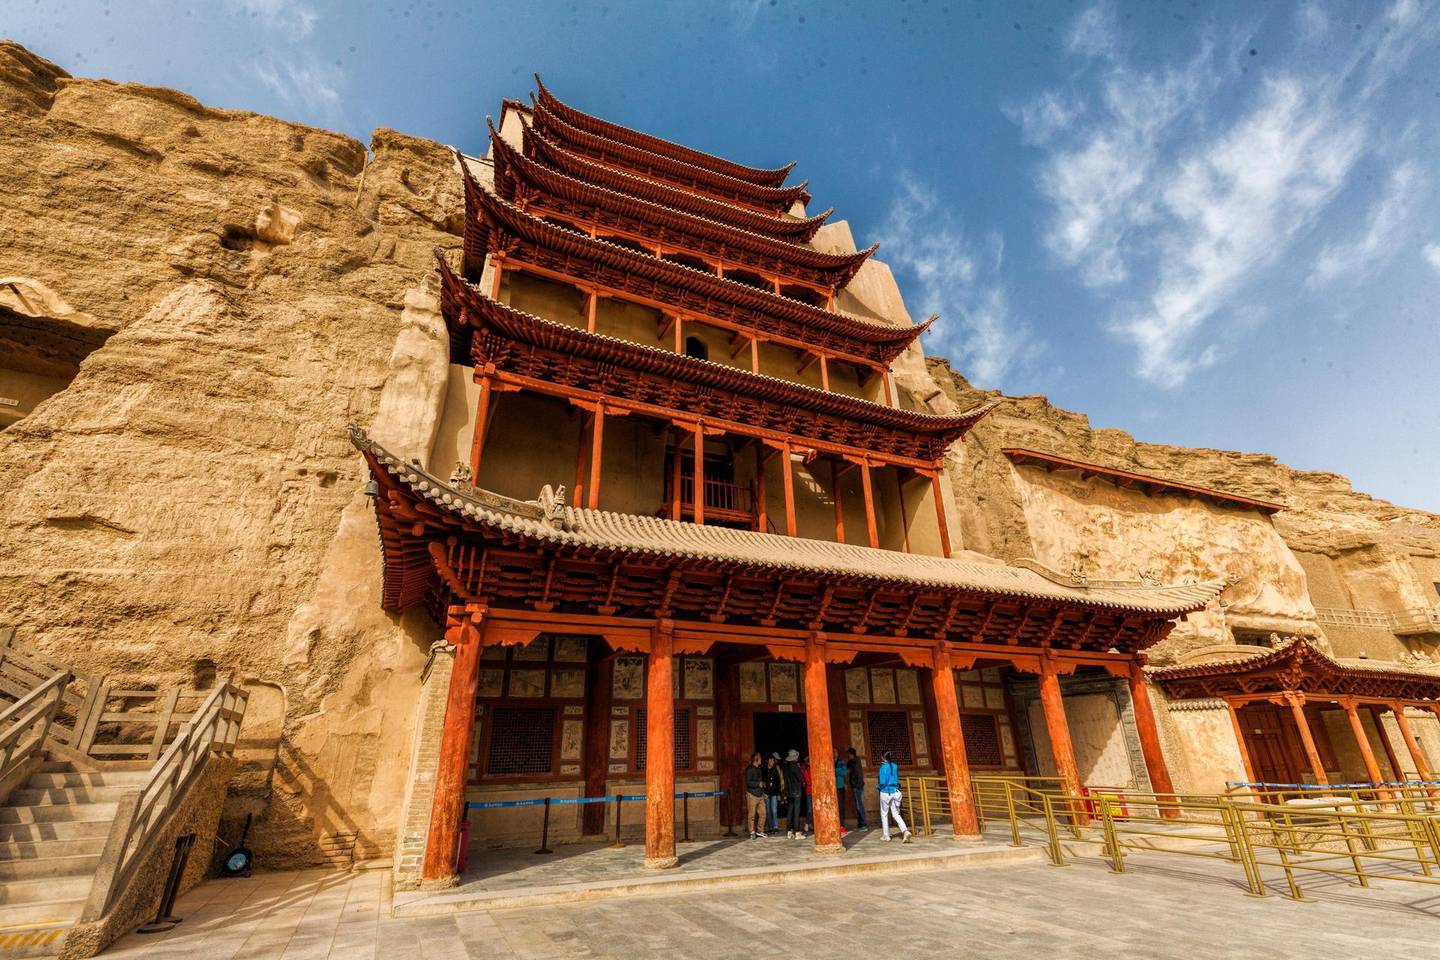 epa07060832 A general view of the Mogao Caves in Dunhuang, Gansu Province, China, 26 September 2018, (issued 01 October 2018). Dunhuang is a city in northwestern Gansu Province, Western China. City was major stop on the ancient Silk Road, established in an oasis which contains Crescent Lake and had strategic position on a crossroads of the Southern Route of Silk Road and main road from India trough Tibet and Mongolia to Southern Siberia. Donhuang is tourist destination best known for Crescent Lake, Mogao Caves, Yardang Geopark and desert with countless sand dunes which are merging to stone composed desert and mountains. At winter temperature riches -25 C and sand dunes become frozen with tops covered in snow. Mogao Caves are located 25 km form Dunhuang. Buddhist caves are famous for their Buddhist art such as murals inside, Buddhist statues and Dunhuang manuscripts found hidden in a sealed-up cave. There is 735 of them. Crescent Lake is a crescent-shaped lake in an oasis, 6 km south of the city. Lake is top tourist attraction and landmark in Donhuang where dune sledding, camel or SUV ride, helicopter flight or dune hiking are offered to visitors. Reports say Dunhuang city of about 200 000 population, accommodate 10 million visitors during a year. Yardang Geopark also known as Devilâ€™s Town and part of it as Ghost Town, is located 180 kilometers northwest of Dunhuang. The park contains rock formations of unique shape developed over a period of 700,000 years. When there are no wind visitors experience soundless environment while walking between rock formations of witch some are naturally shaped to remind viewer on peacock, buddha, camel etc. Yardang covers area of abut 400 square kilometers and its part of UNESCO protected areas.  EPA/ALEKSANDER PLAVEVSKI